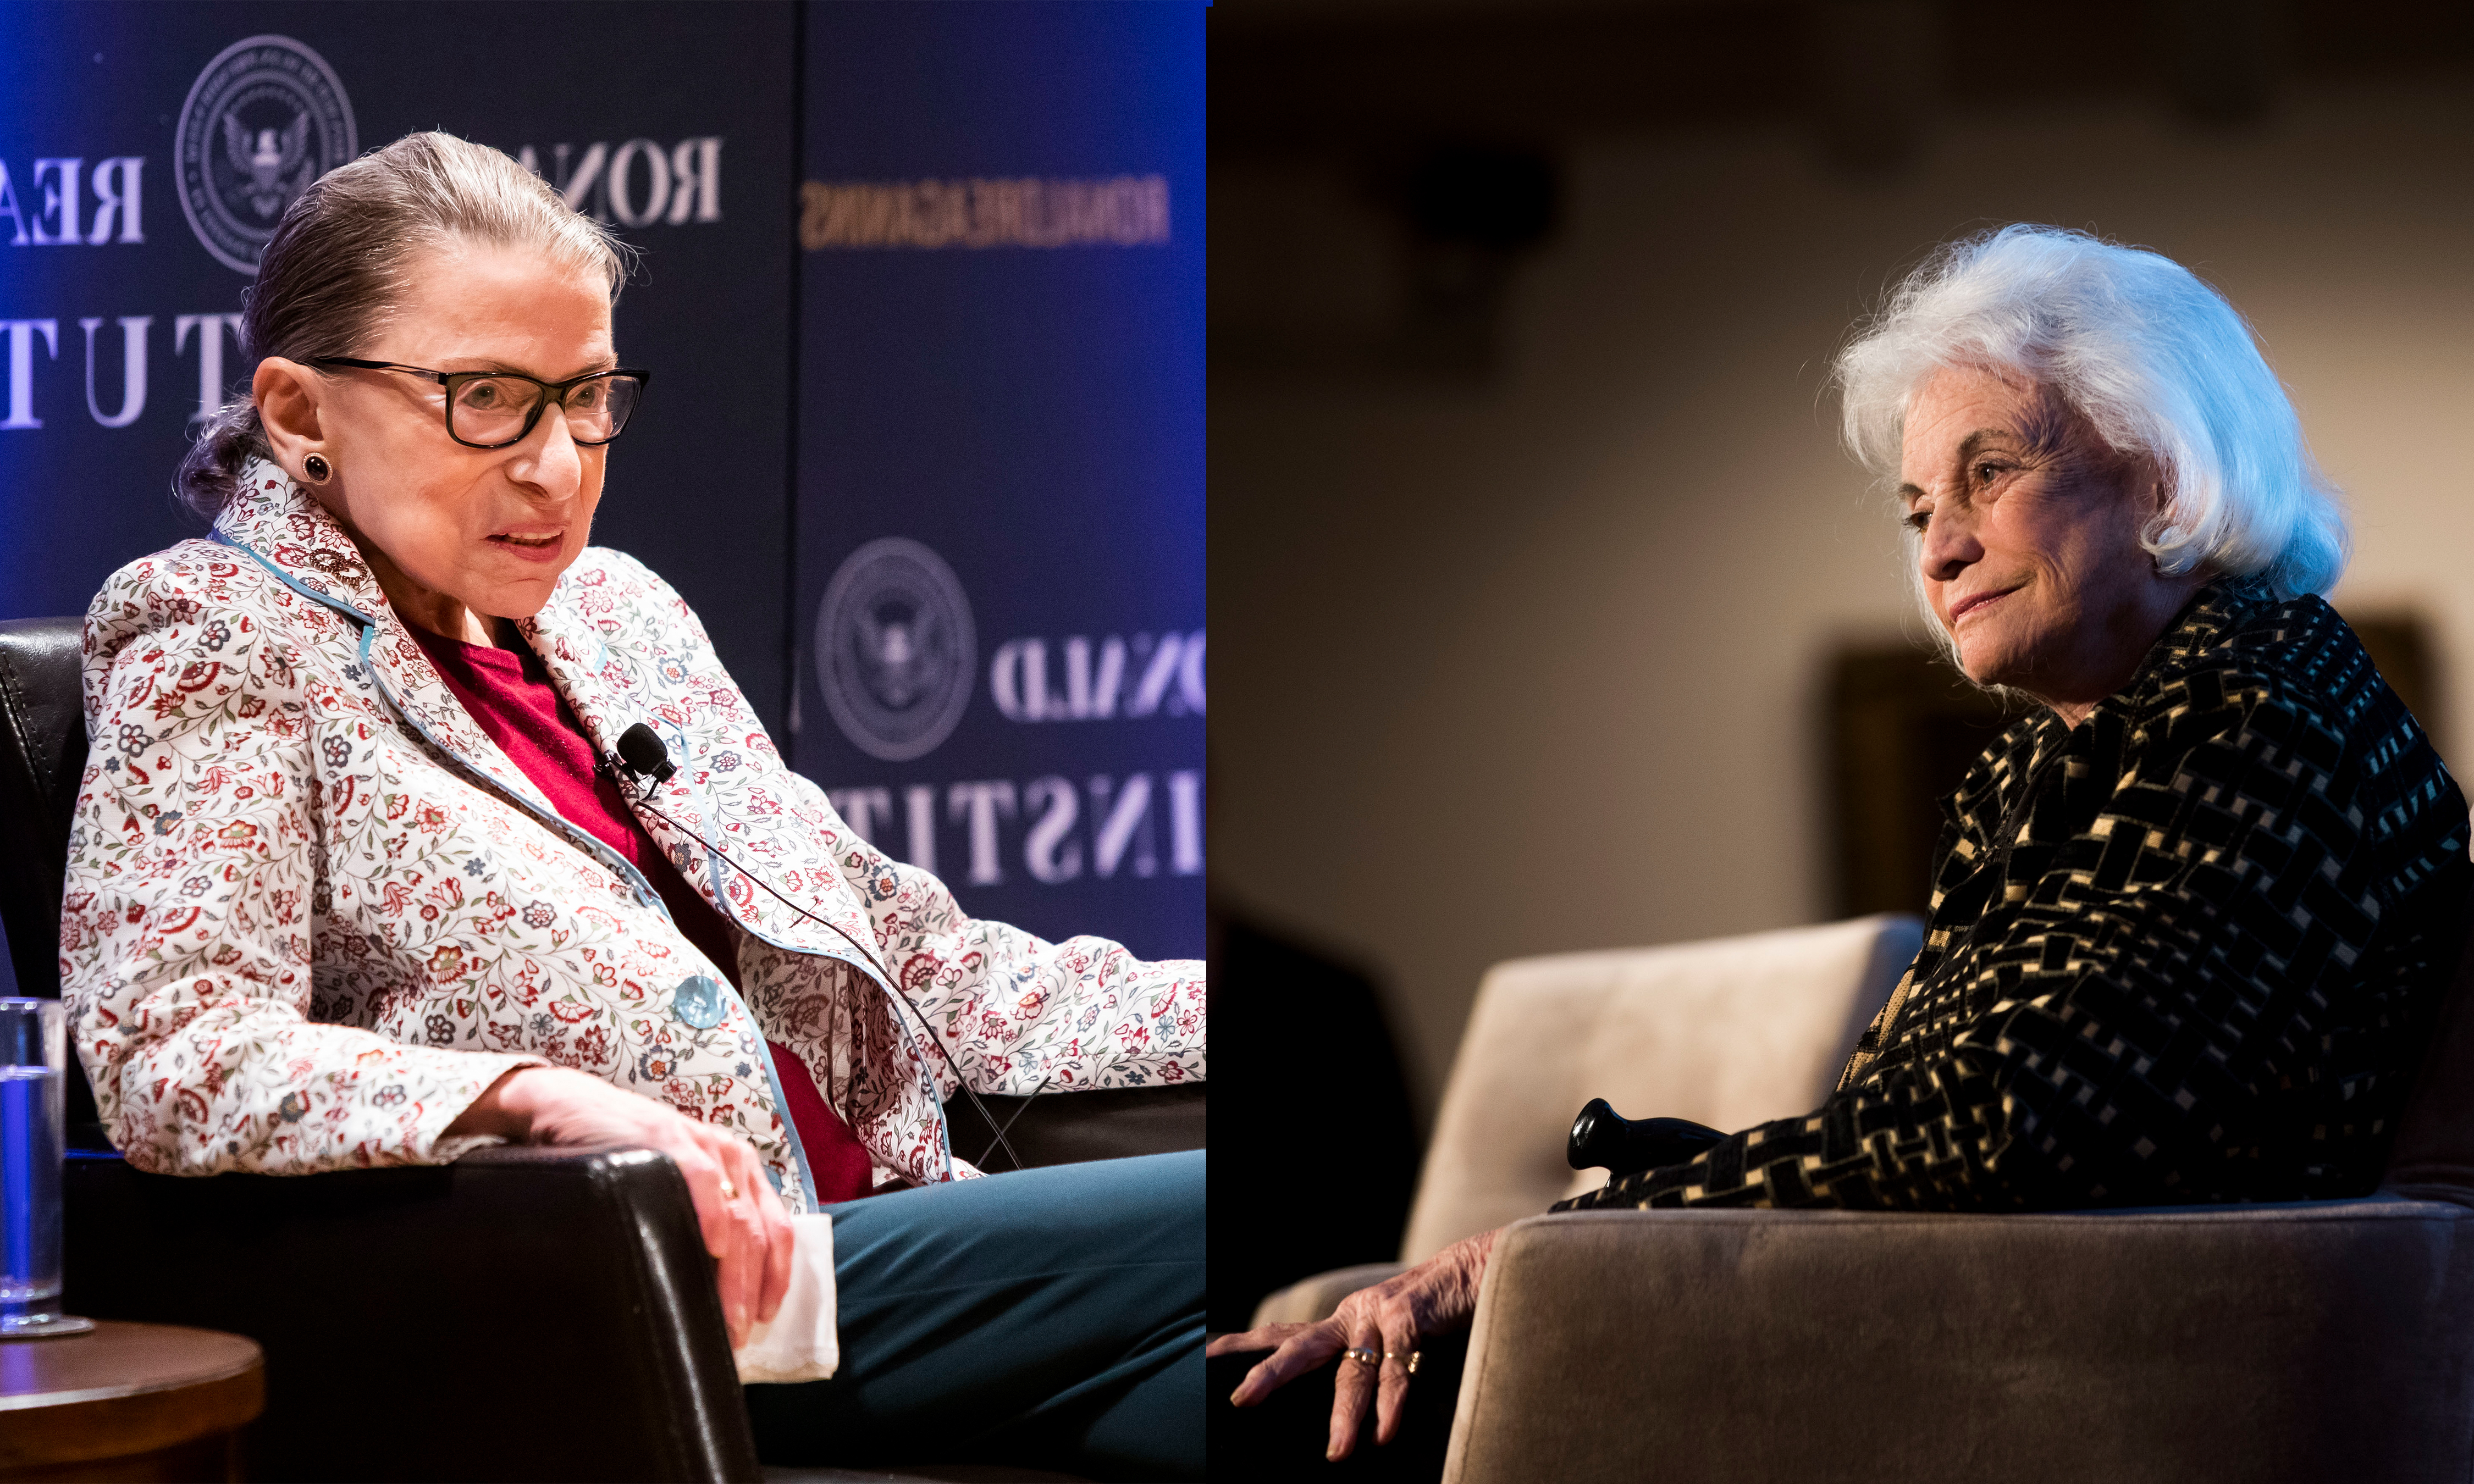 Ruth Bader Ginsburg, left, and Sandra Day O'Connor, right. Photos: Diego M. Radzinschi/ALM and Kevin Wolf/AP